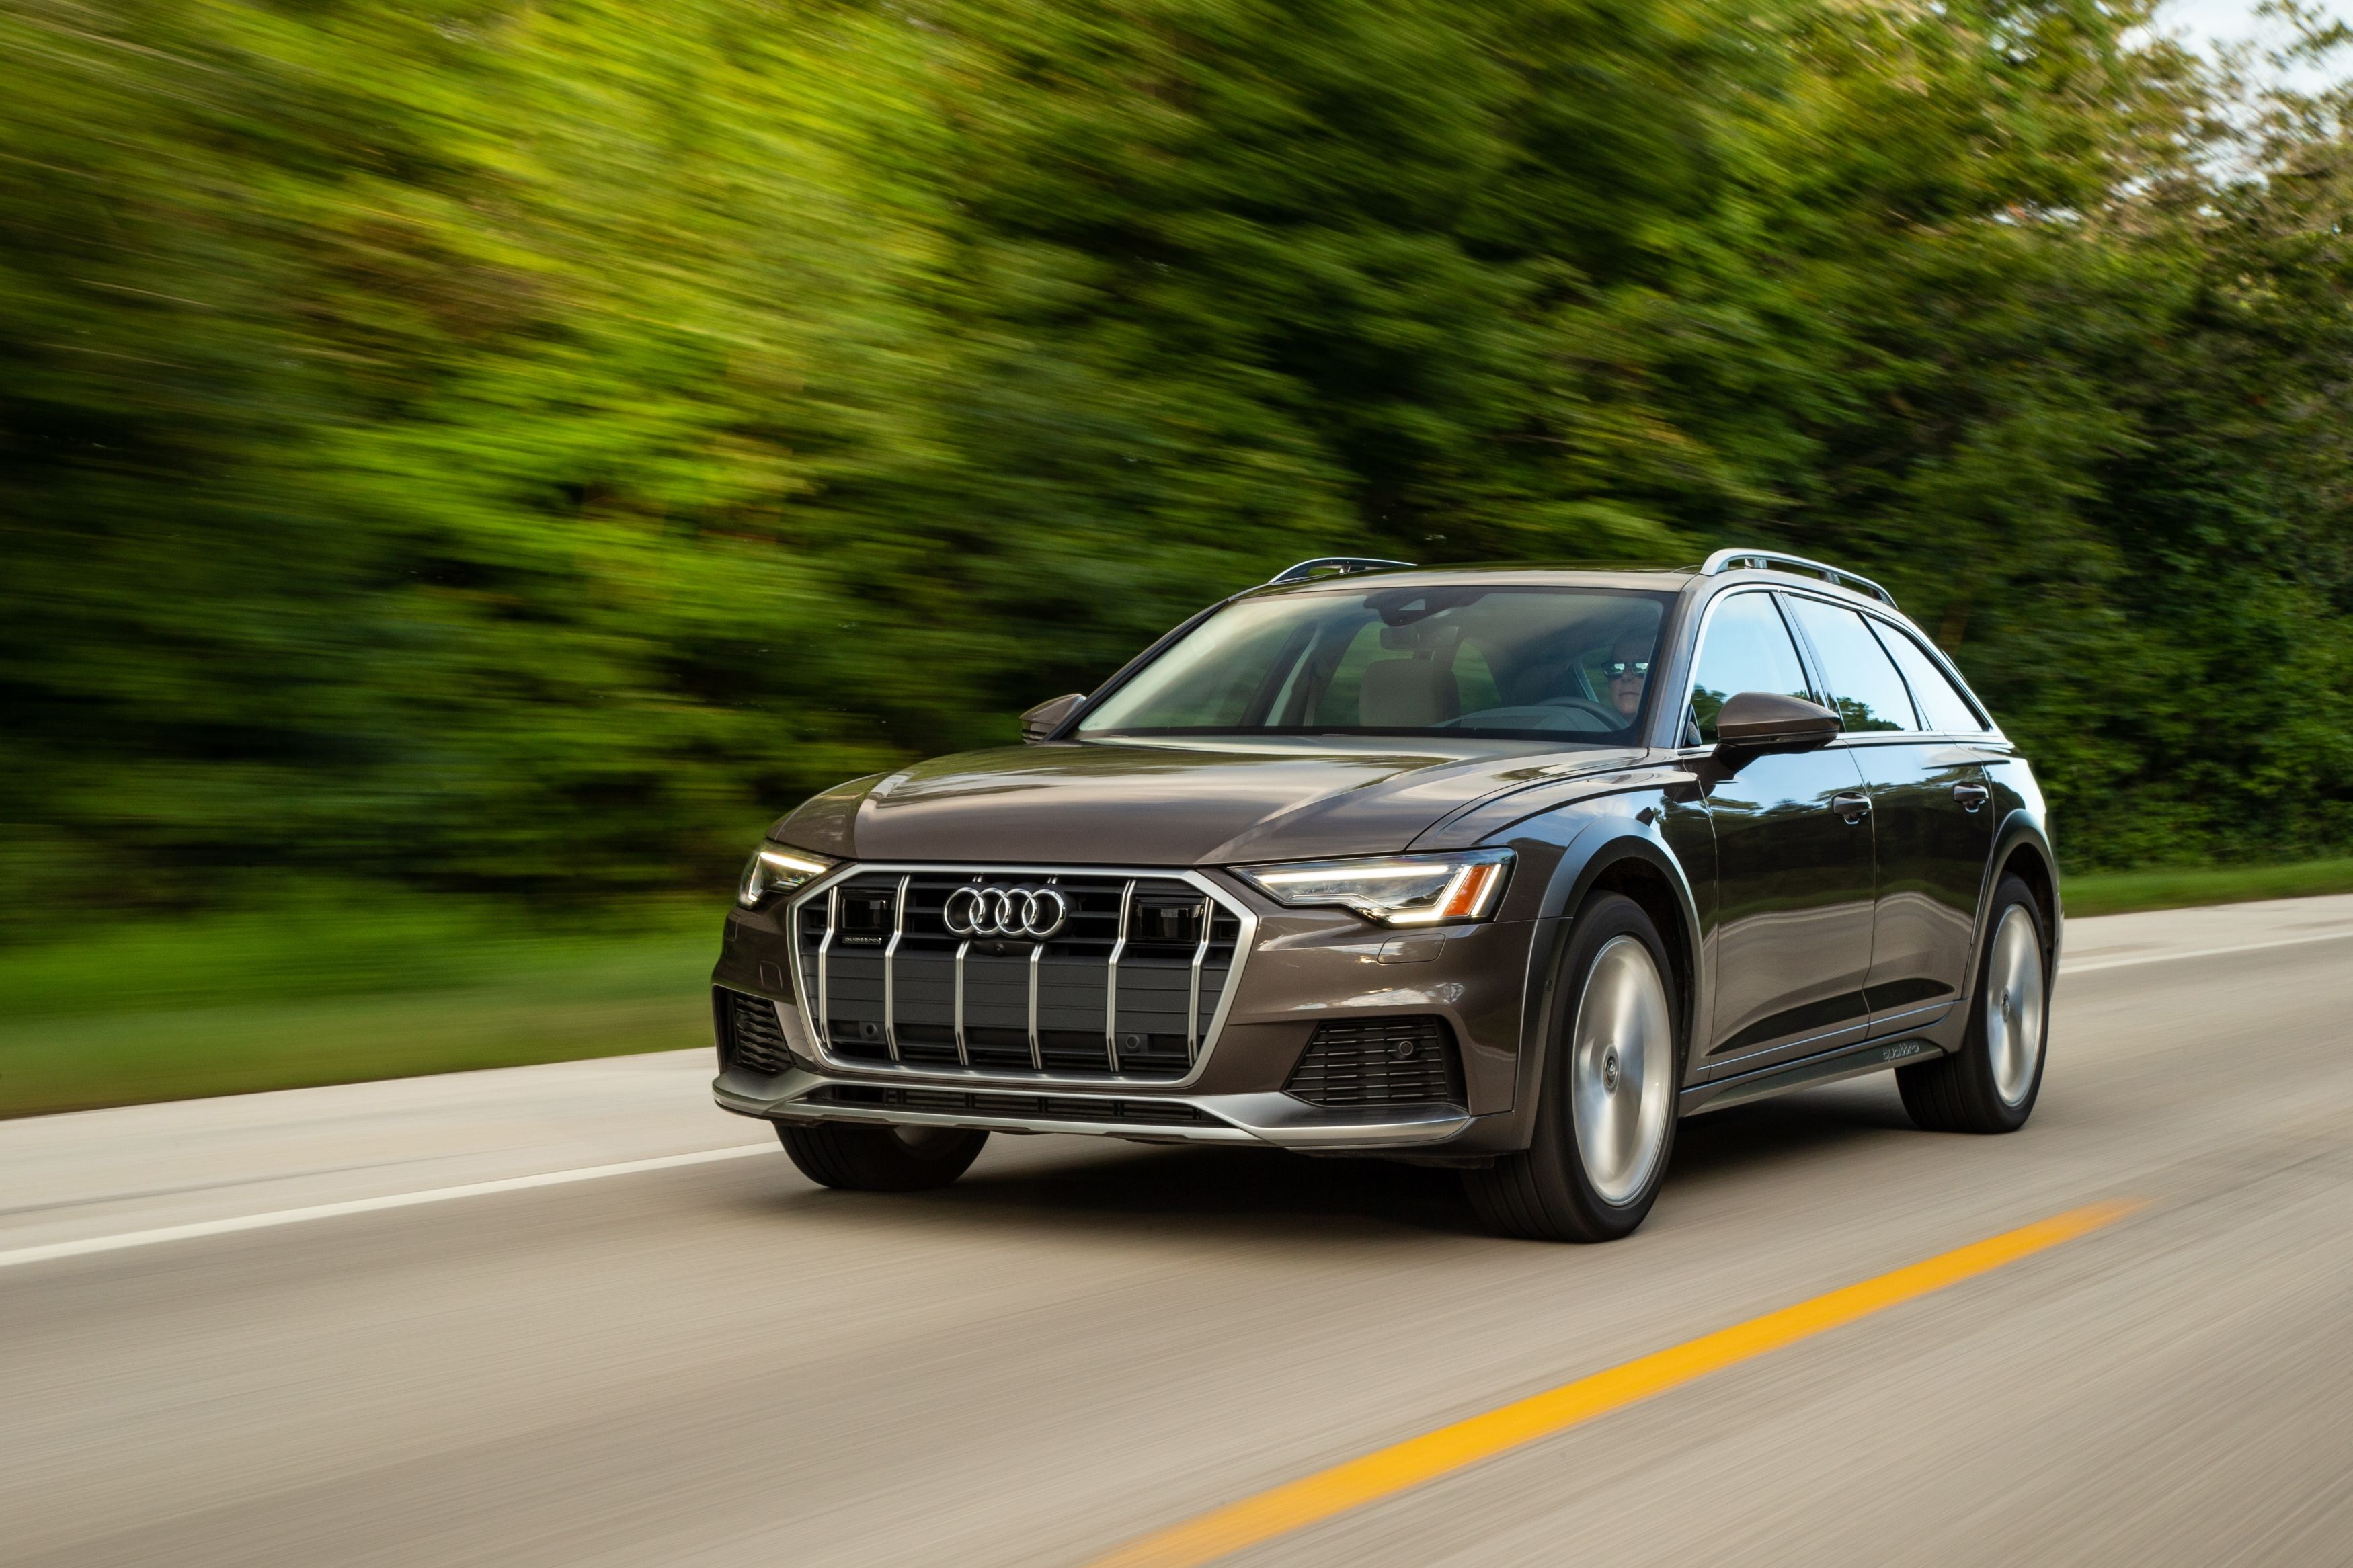 20 years of A6 Avant with offroad qualities: the new Audi A6